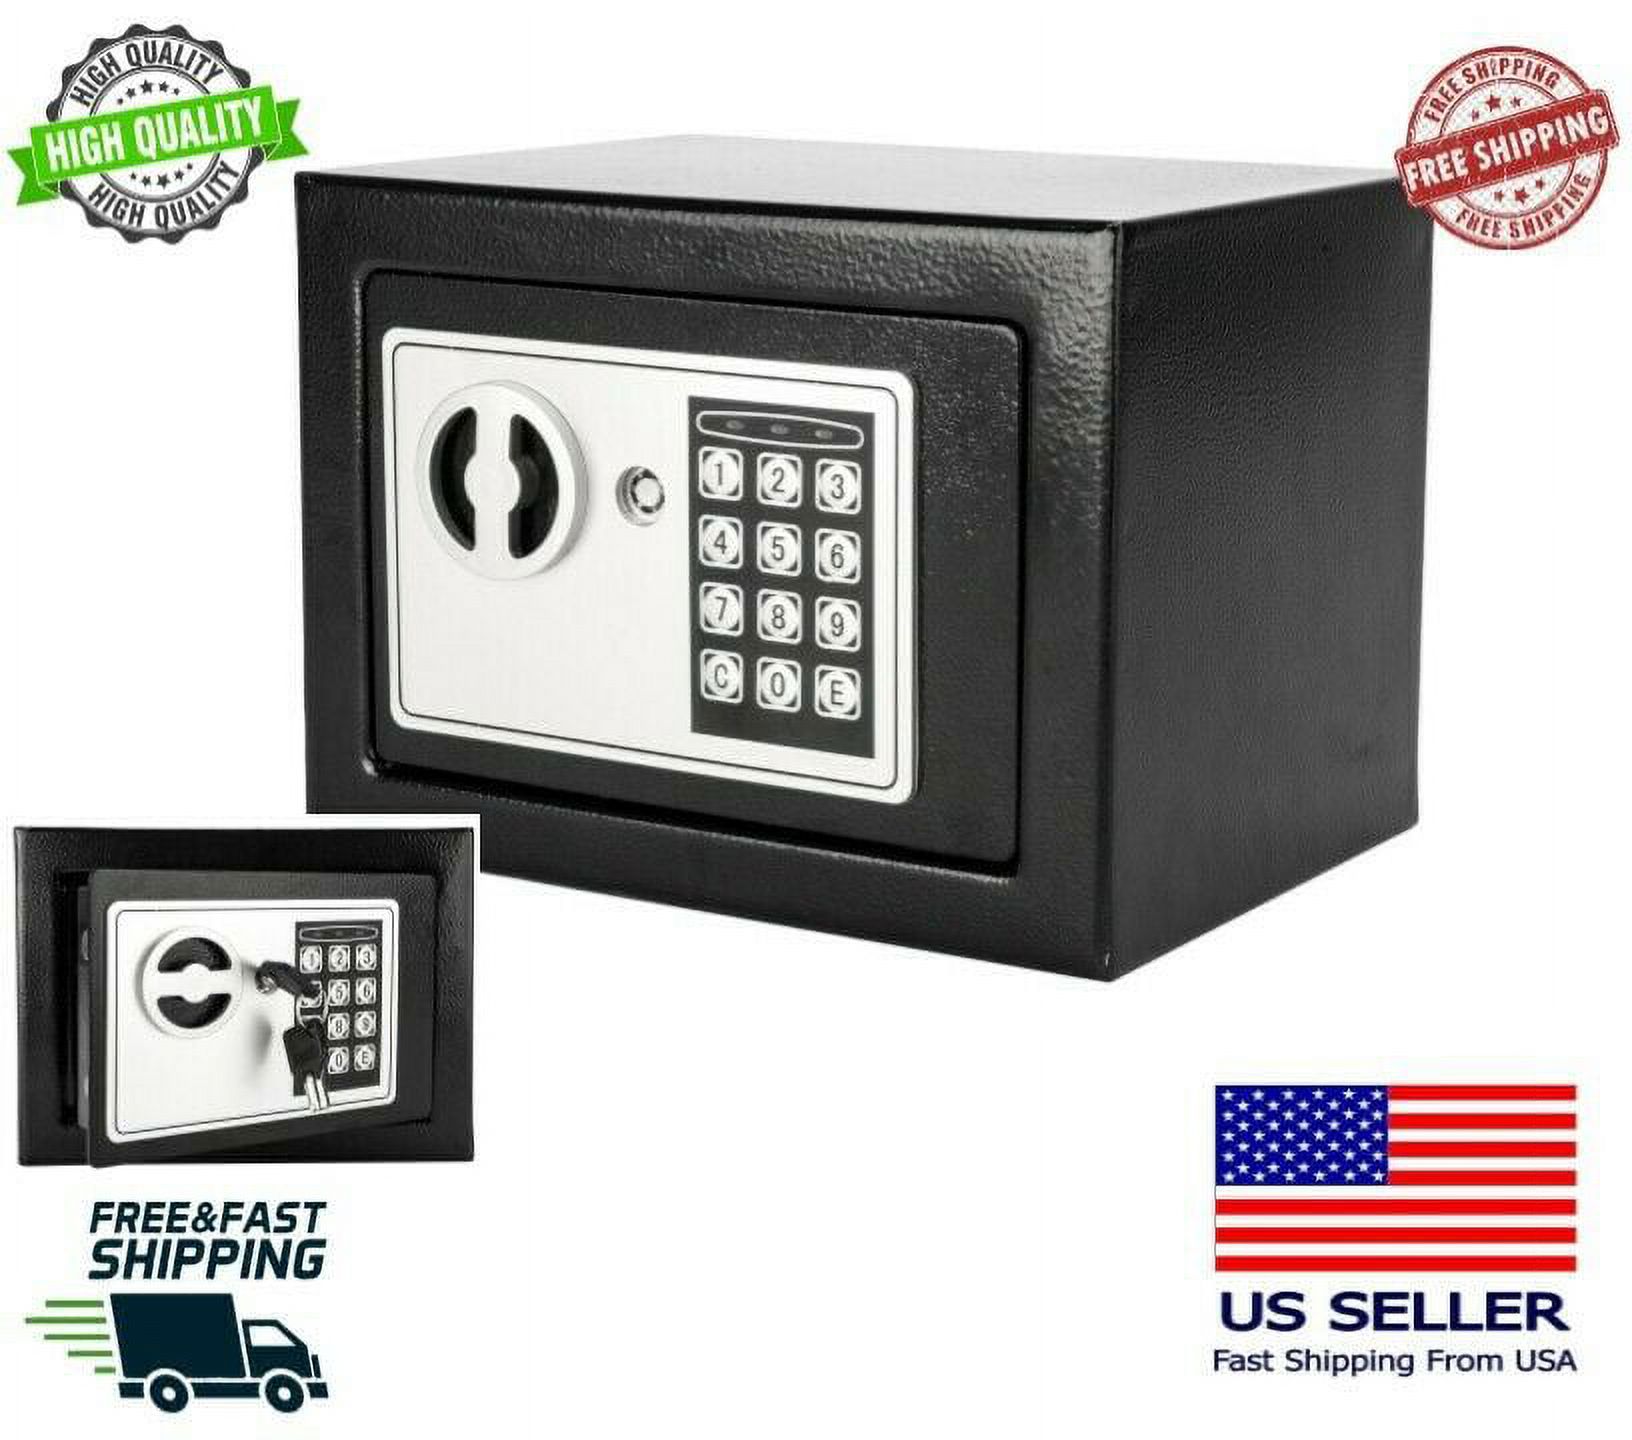 Security Safe - Digital Safe, Electronic Steel, Fireproof Lock Box with Keypad to Protect Money, Jewelry, Passports for Home, Business or Travel Black (Black) - image 1 of 9